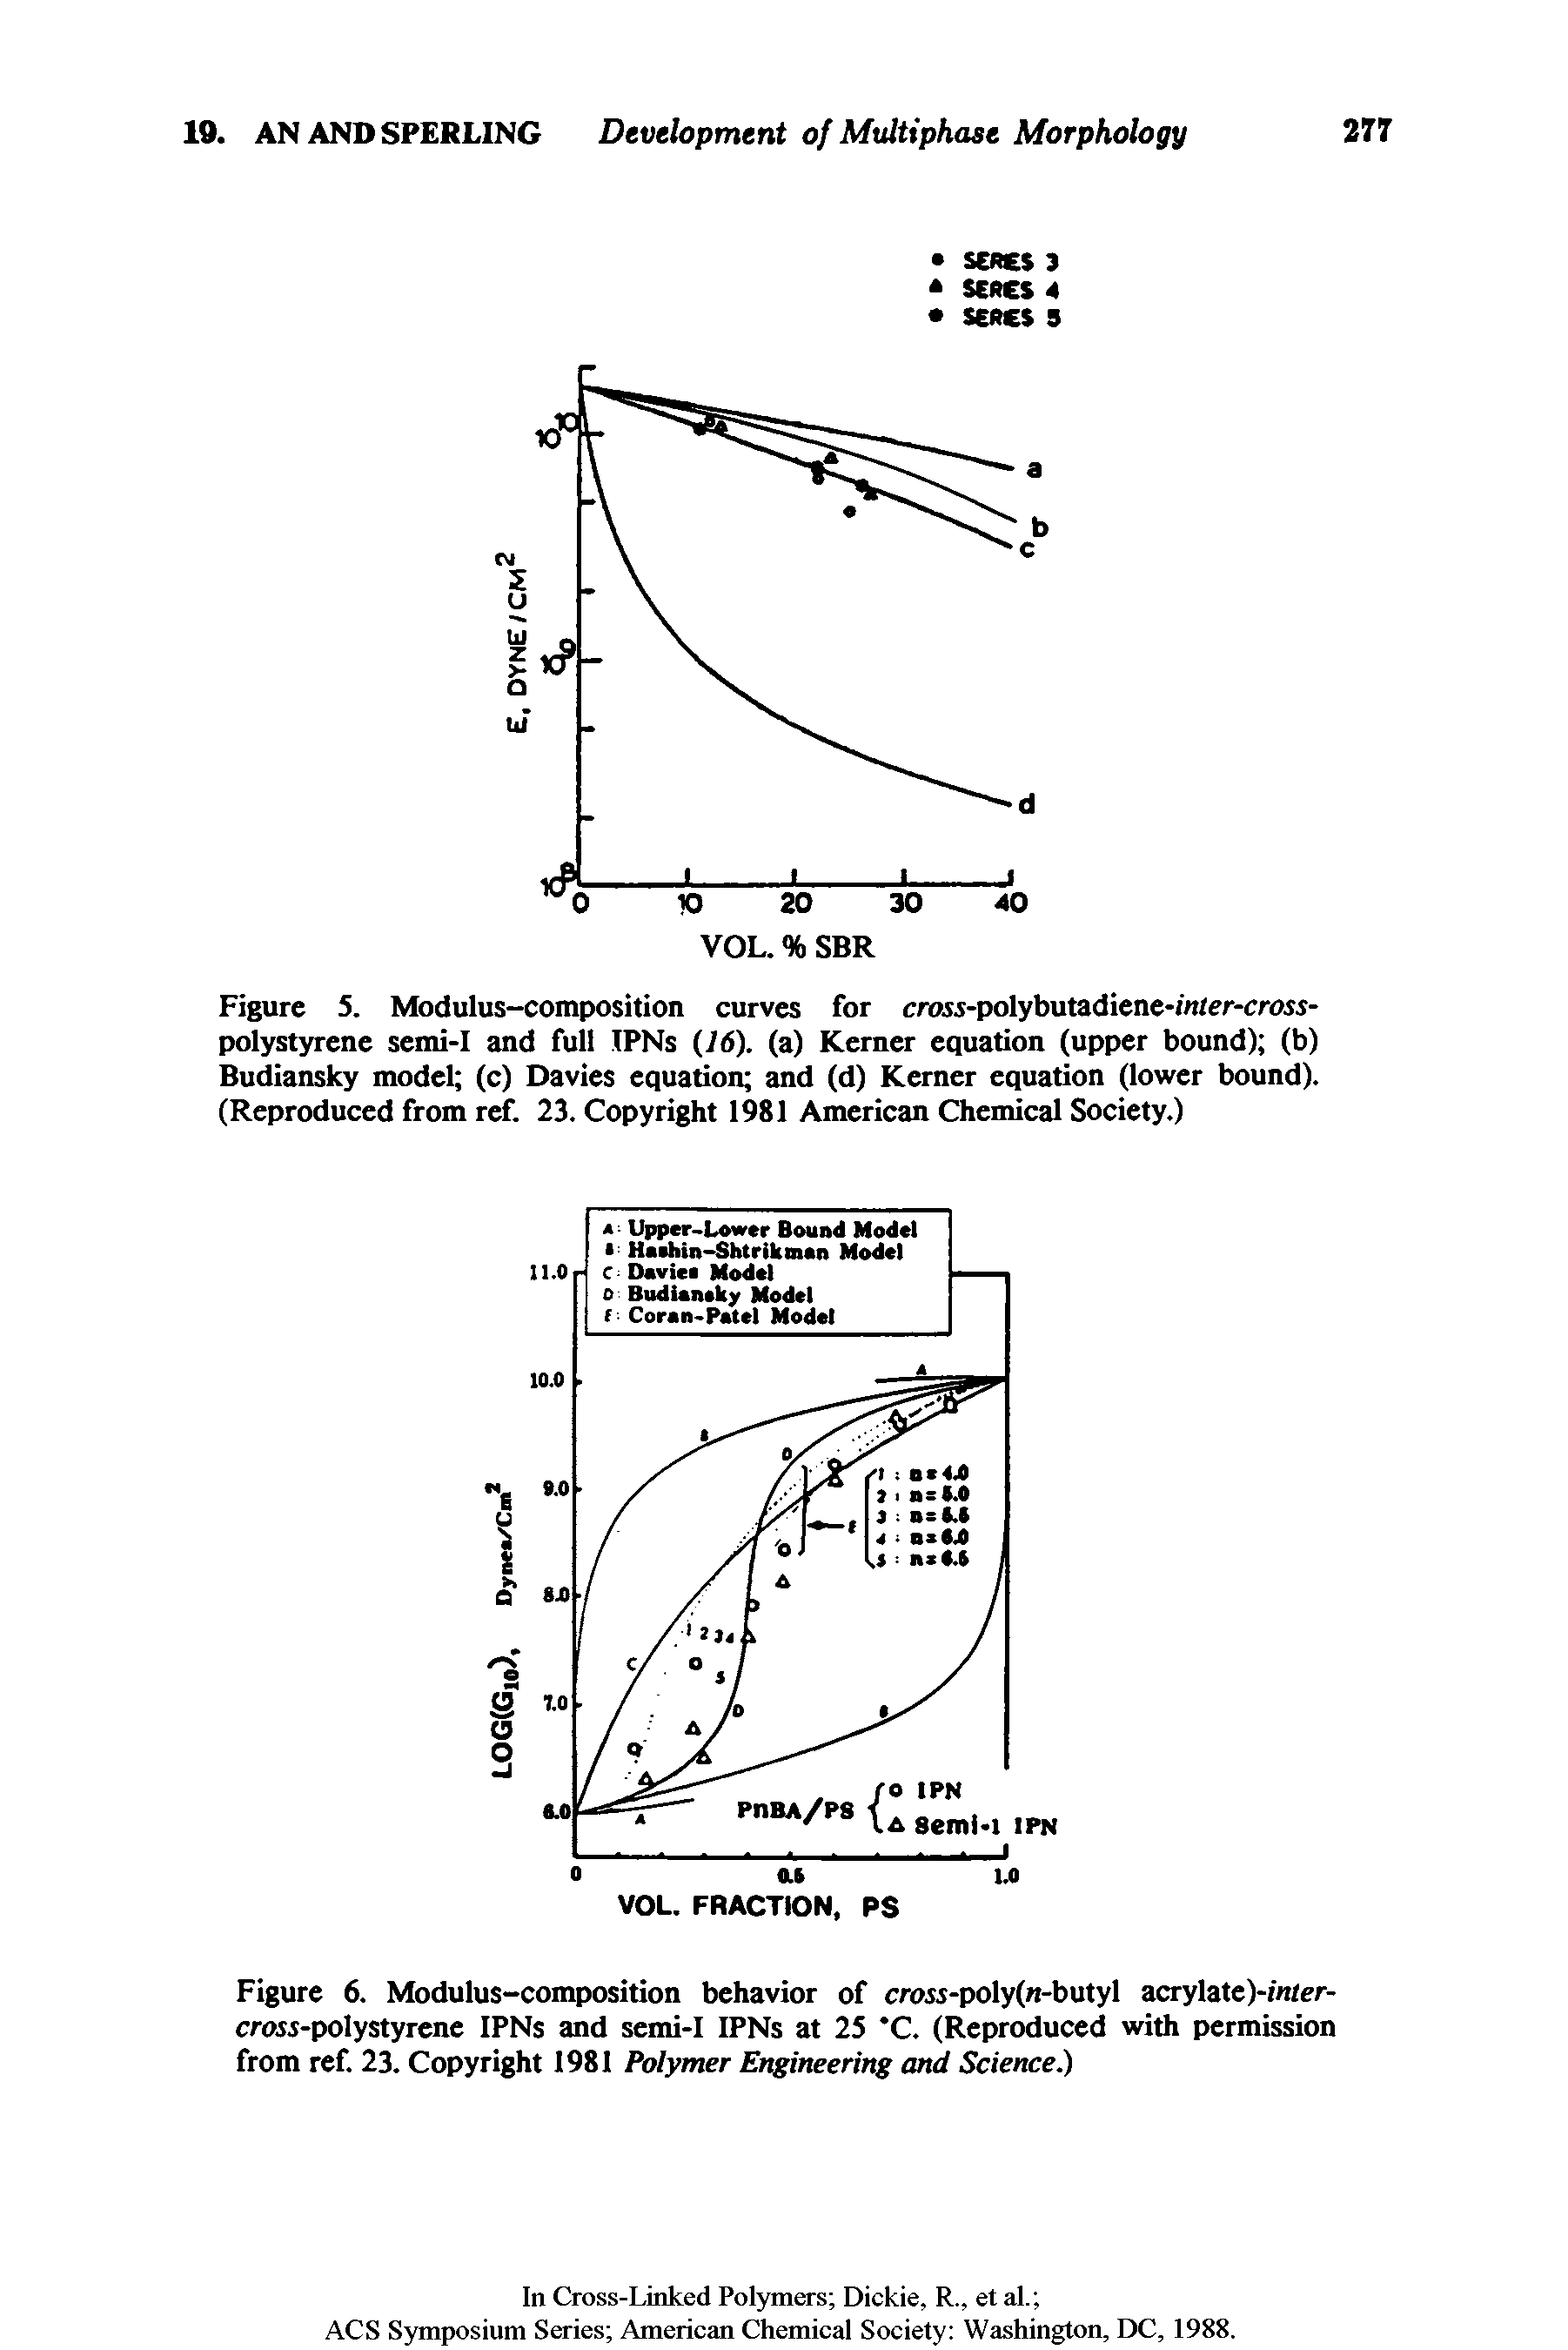 Figure 5. Modulus-composition curves for crass-polybutadiene-inier-cross-polystyrene semi-I and full IPNs (16). (a) Kerner equation (upper bound) (b) Budiansky model (c) Davies equation and (d) Kerner equation (lower bound). (Reproduced from ref. 23. Copyright 1981 American Chemical Society.)...